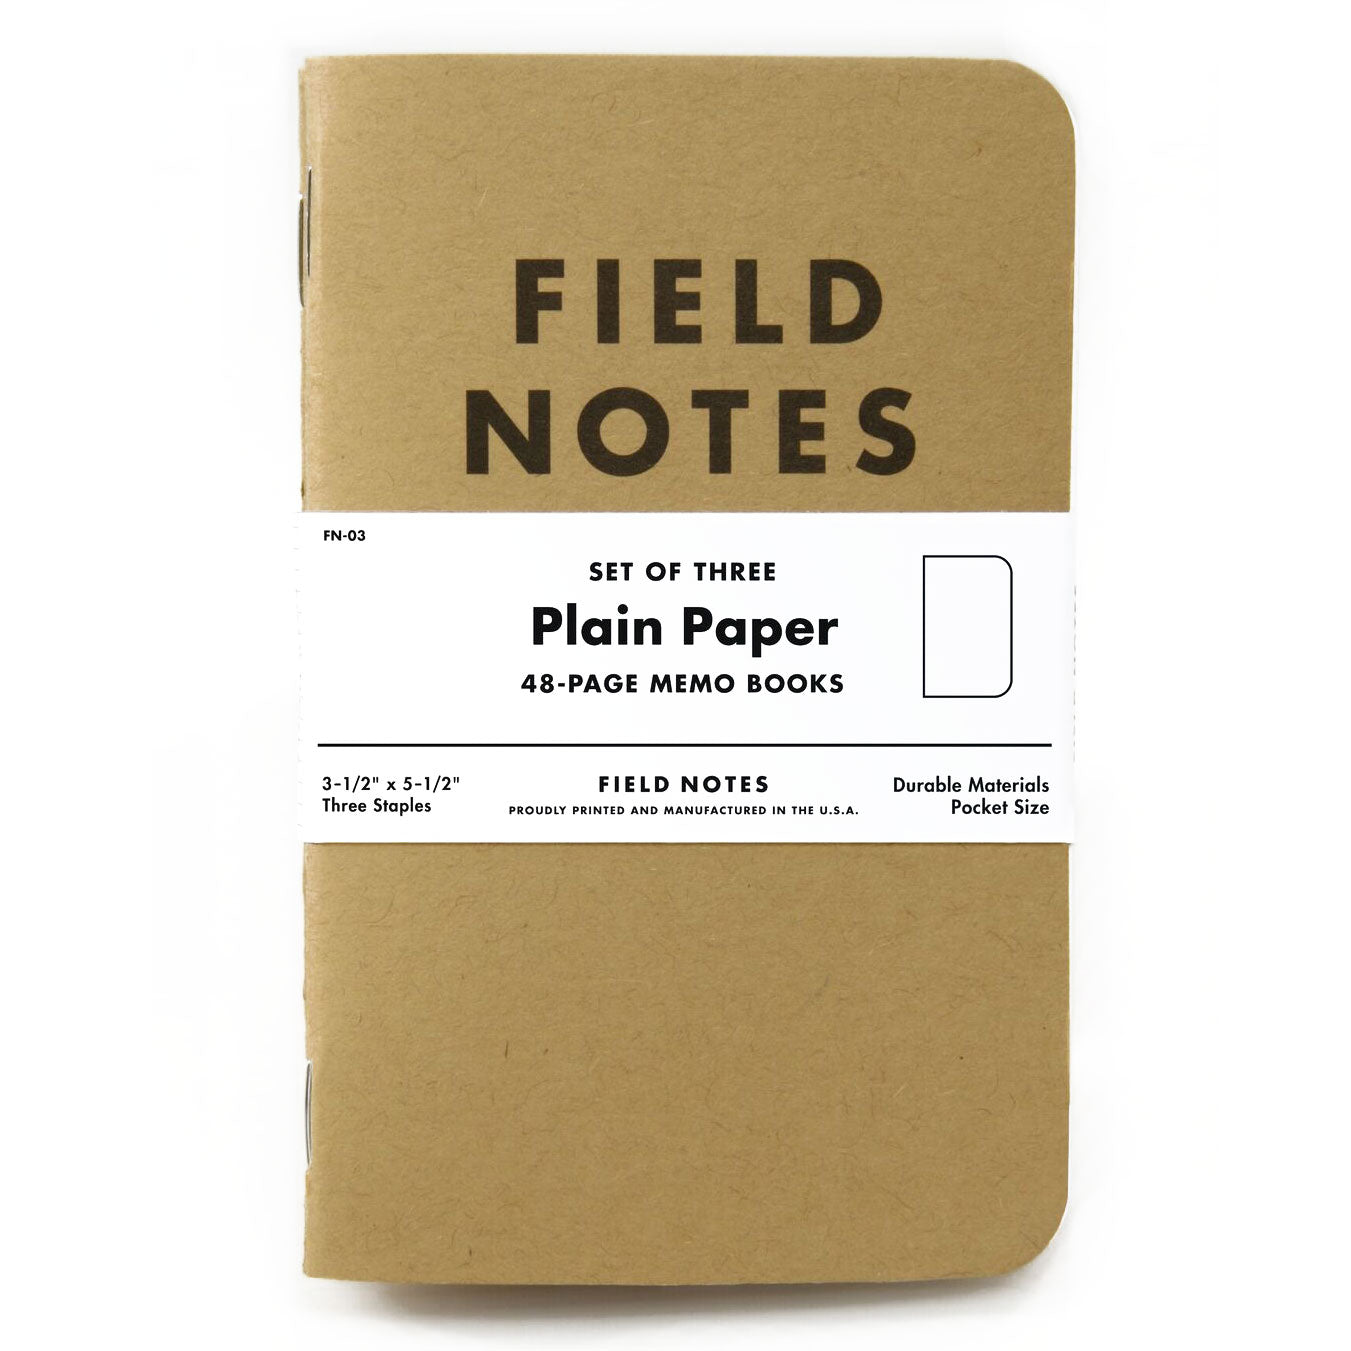 Field Notes Plain Paper Memo Notebook (Set of 3)